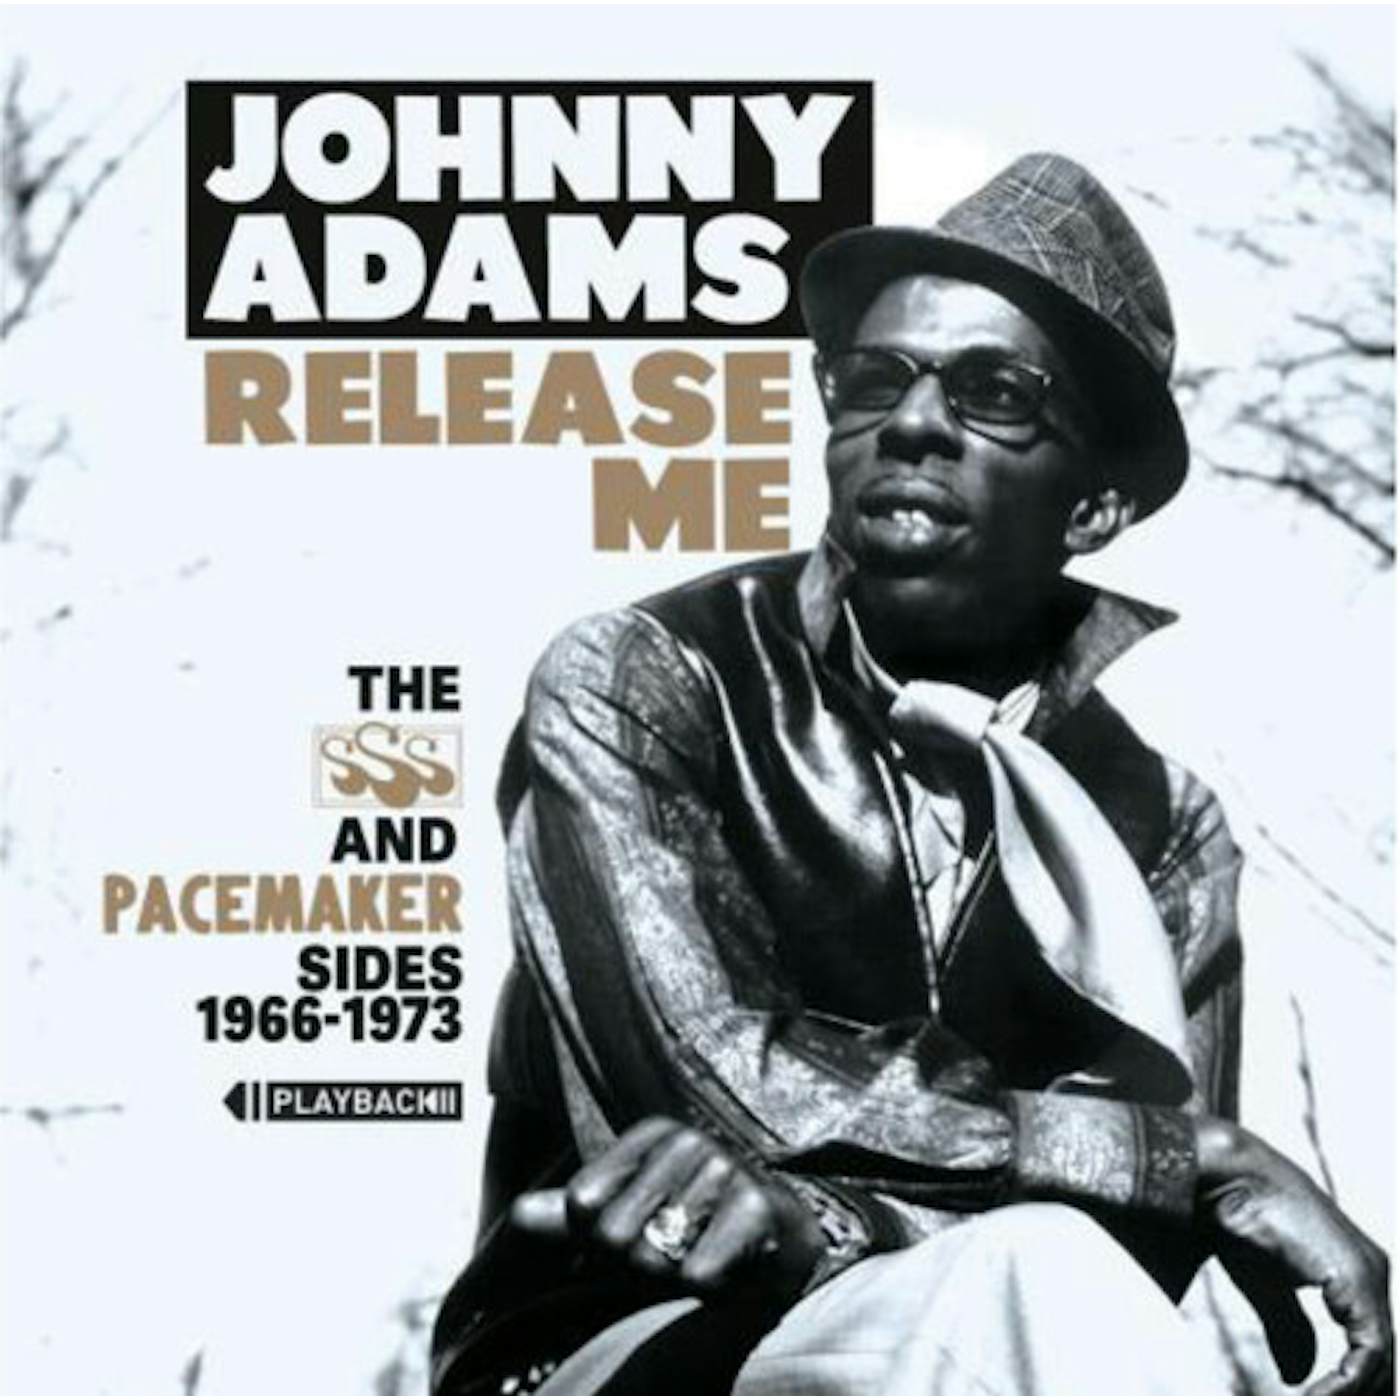 Johnny Adams RELEASE ME: THE SSS AND PACEMAKERSIDES 1966-1973 CD